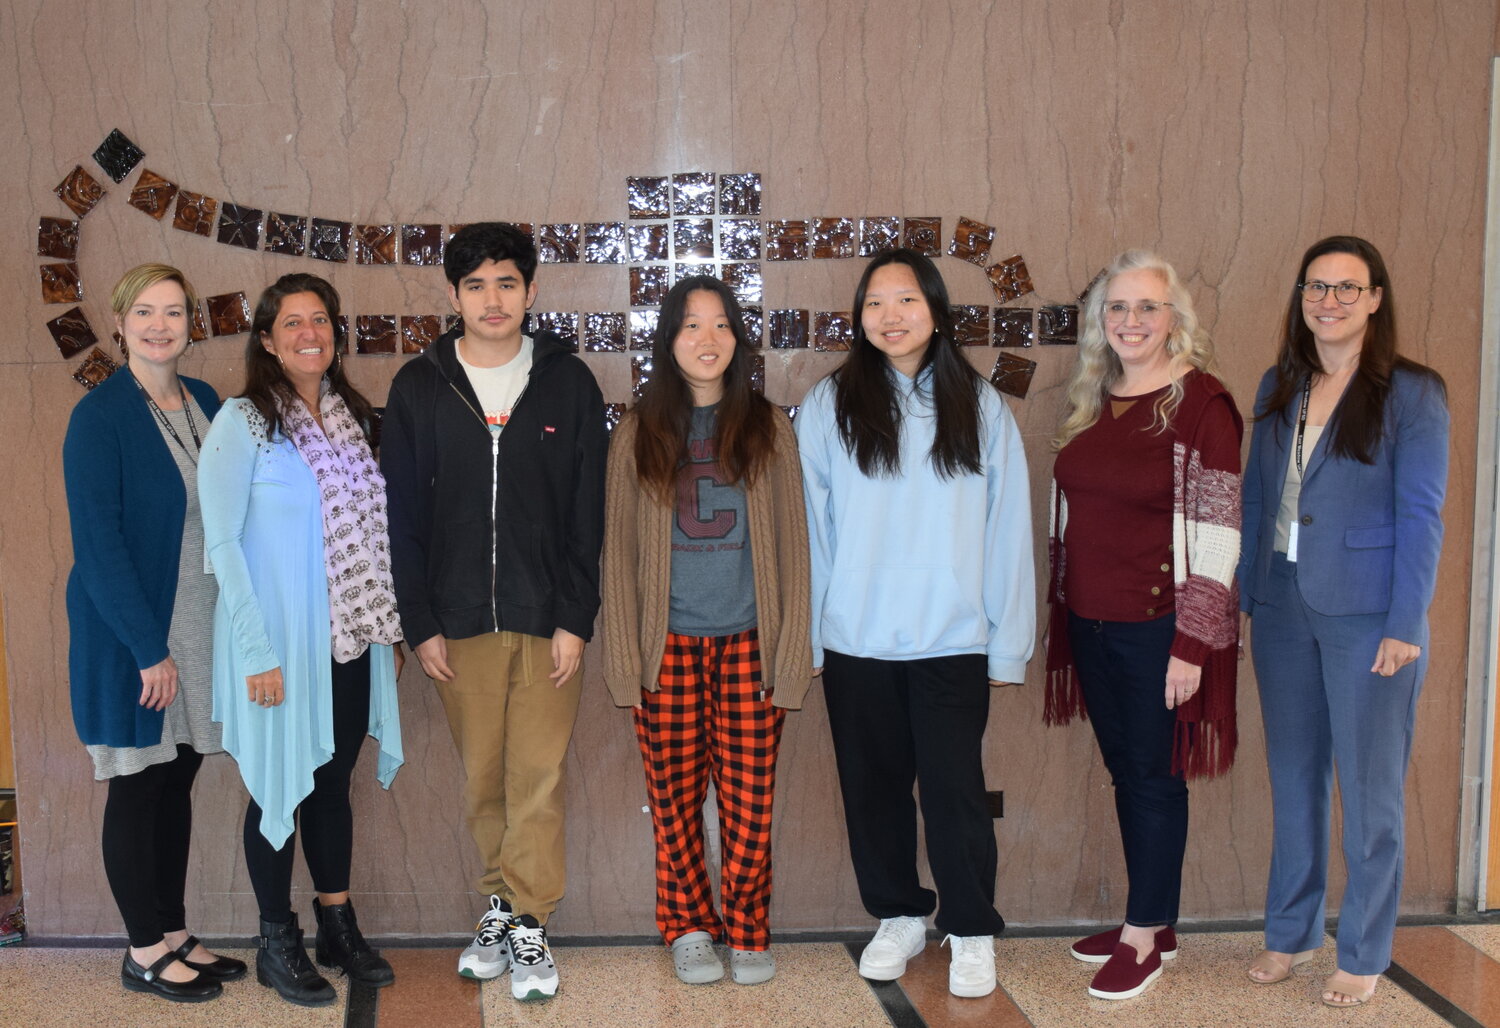 W.T. Clarke High School students Ricardo Canales, third from left, Claire Baek and Chae Ryeong Kim were selected as exhibiting artists for the Long Island’s Best Young Artists at The Heckscher Museum exhibition. Also pictured is the district’s Art Department Chairperson Heather Anastasio, far left, art teacher Jeannene Arcuri, second from left, art teacher Marlena Dentrone, second from right, and the district’s Director of Music and Art Kelly Nixon.